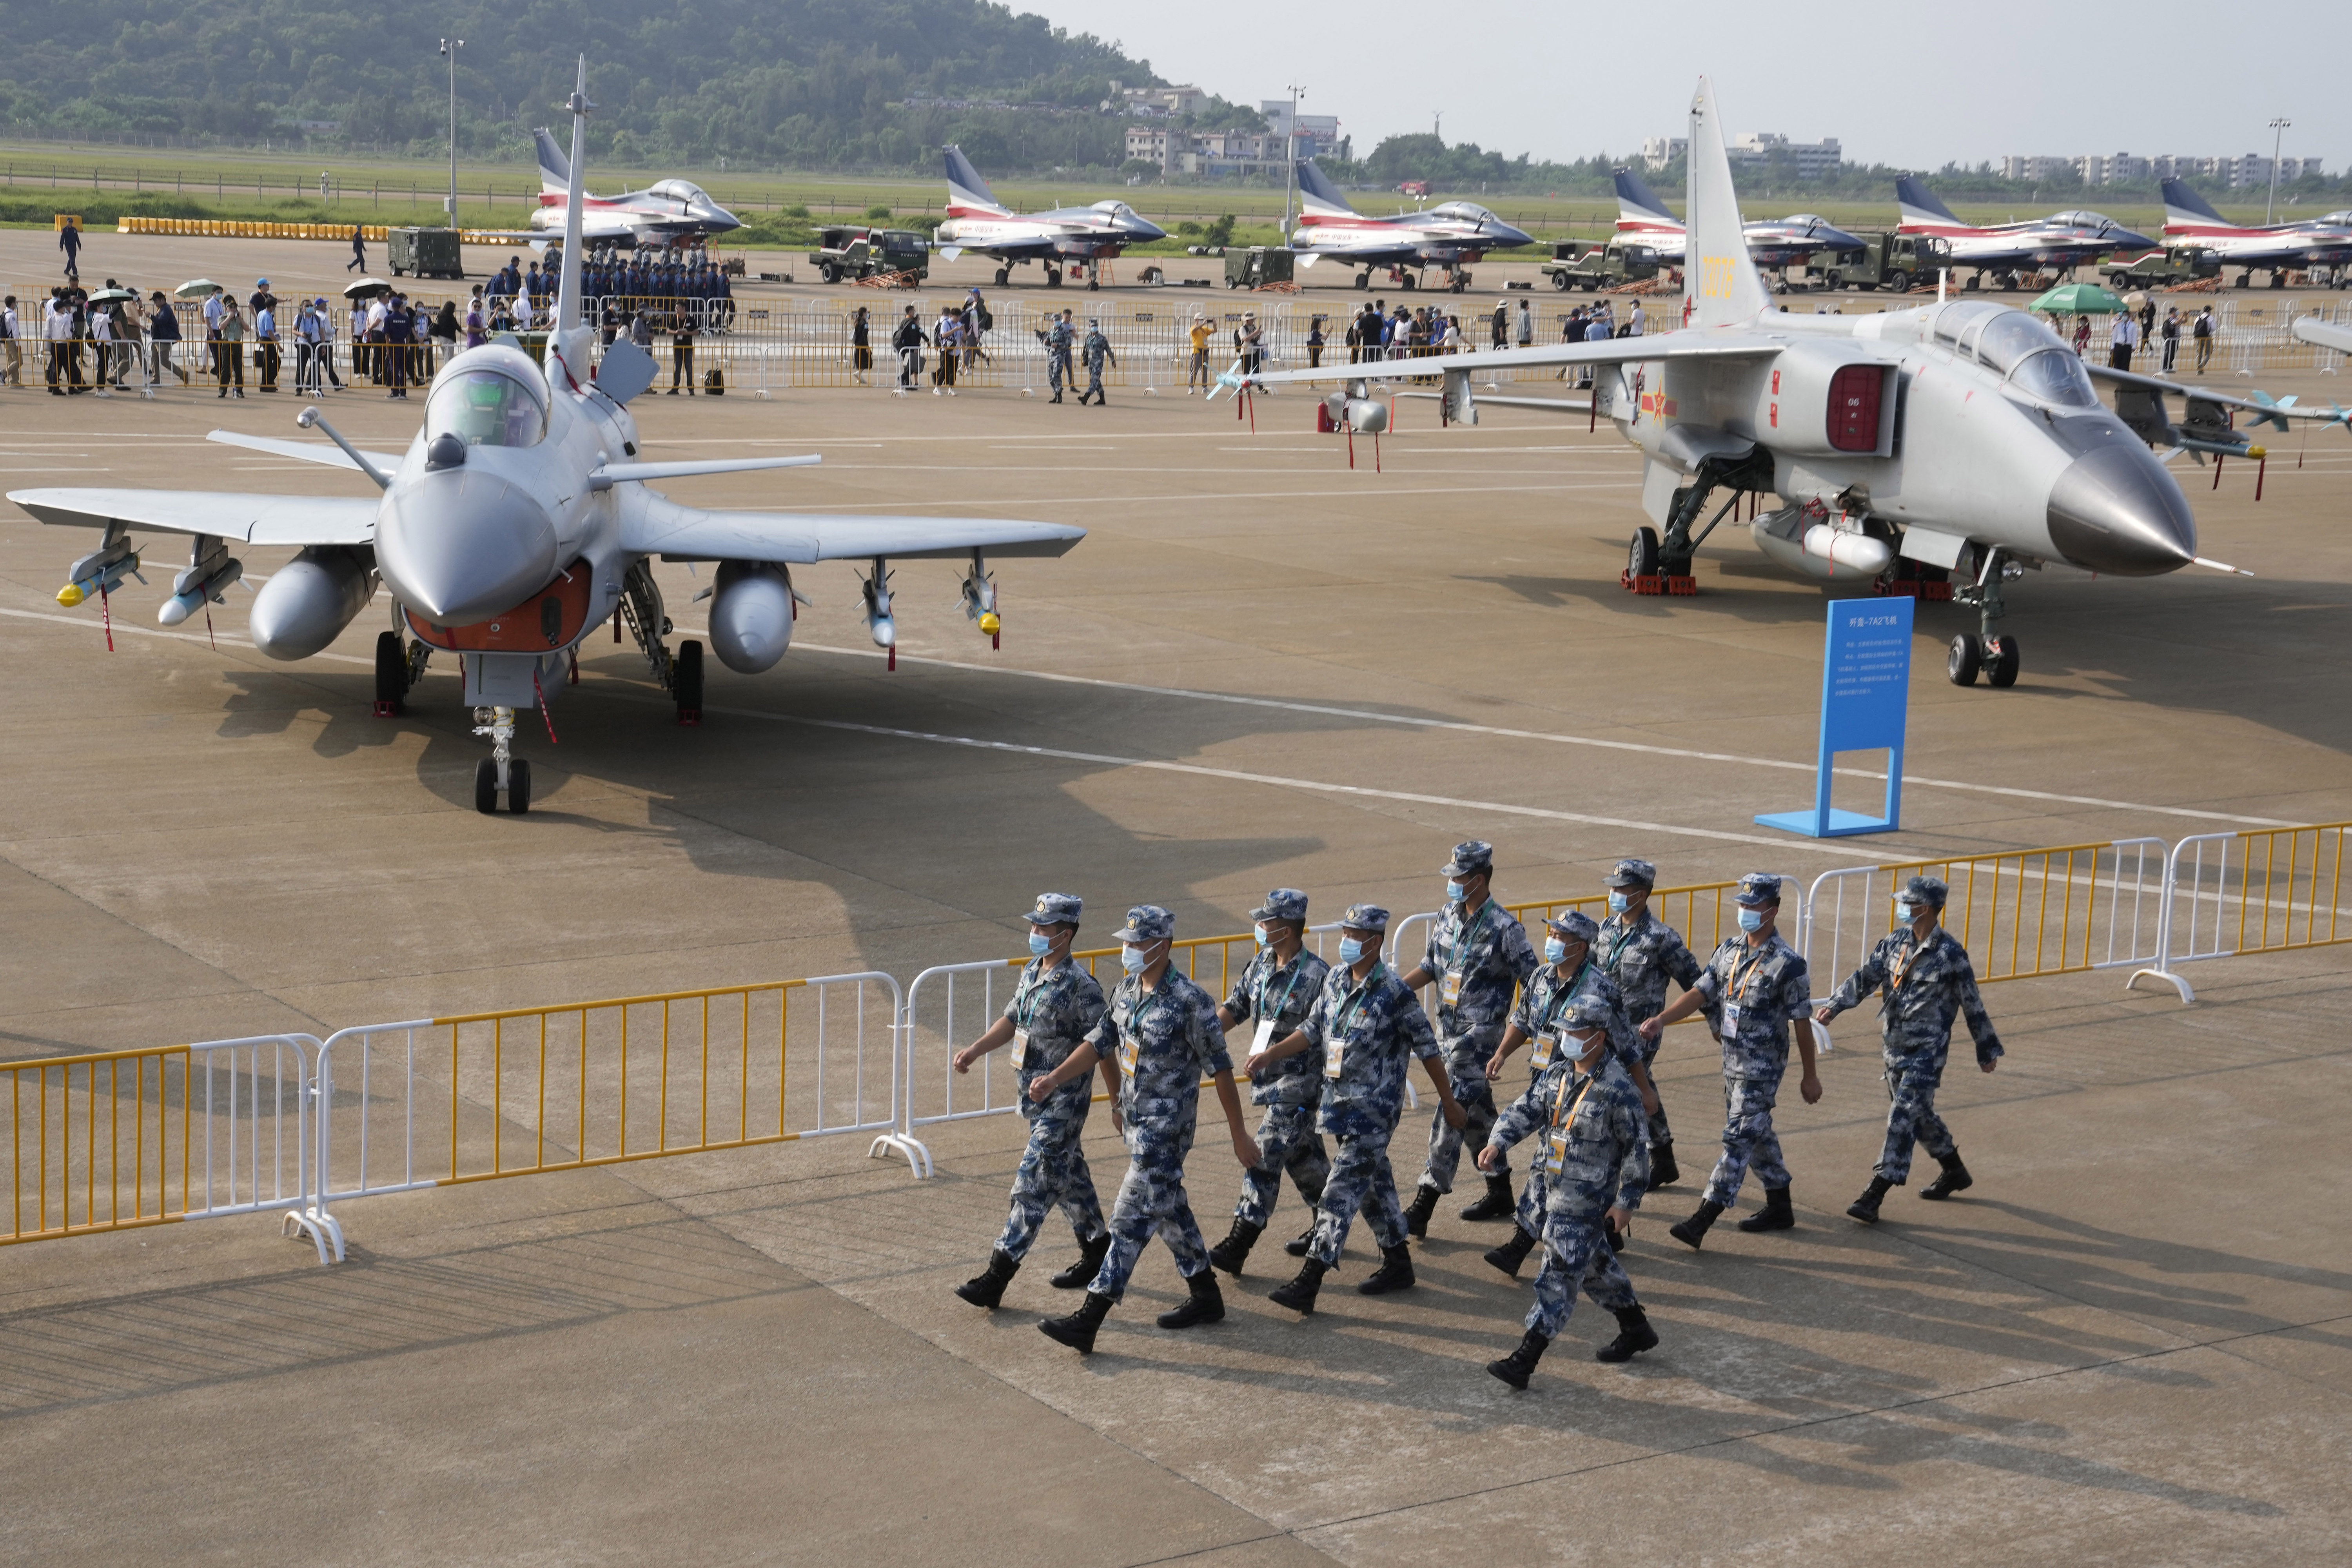 Chinese Air Force personnel at the 13th China International Aviation and Aerospace Exhibition last month 